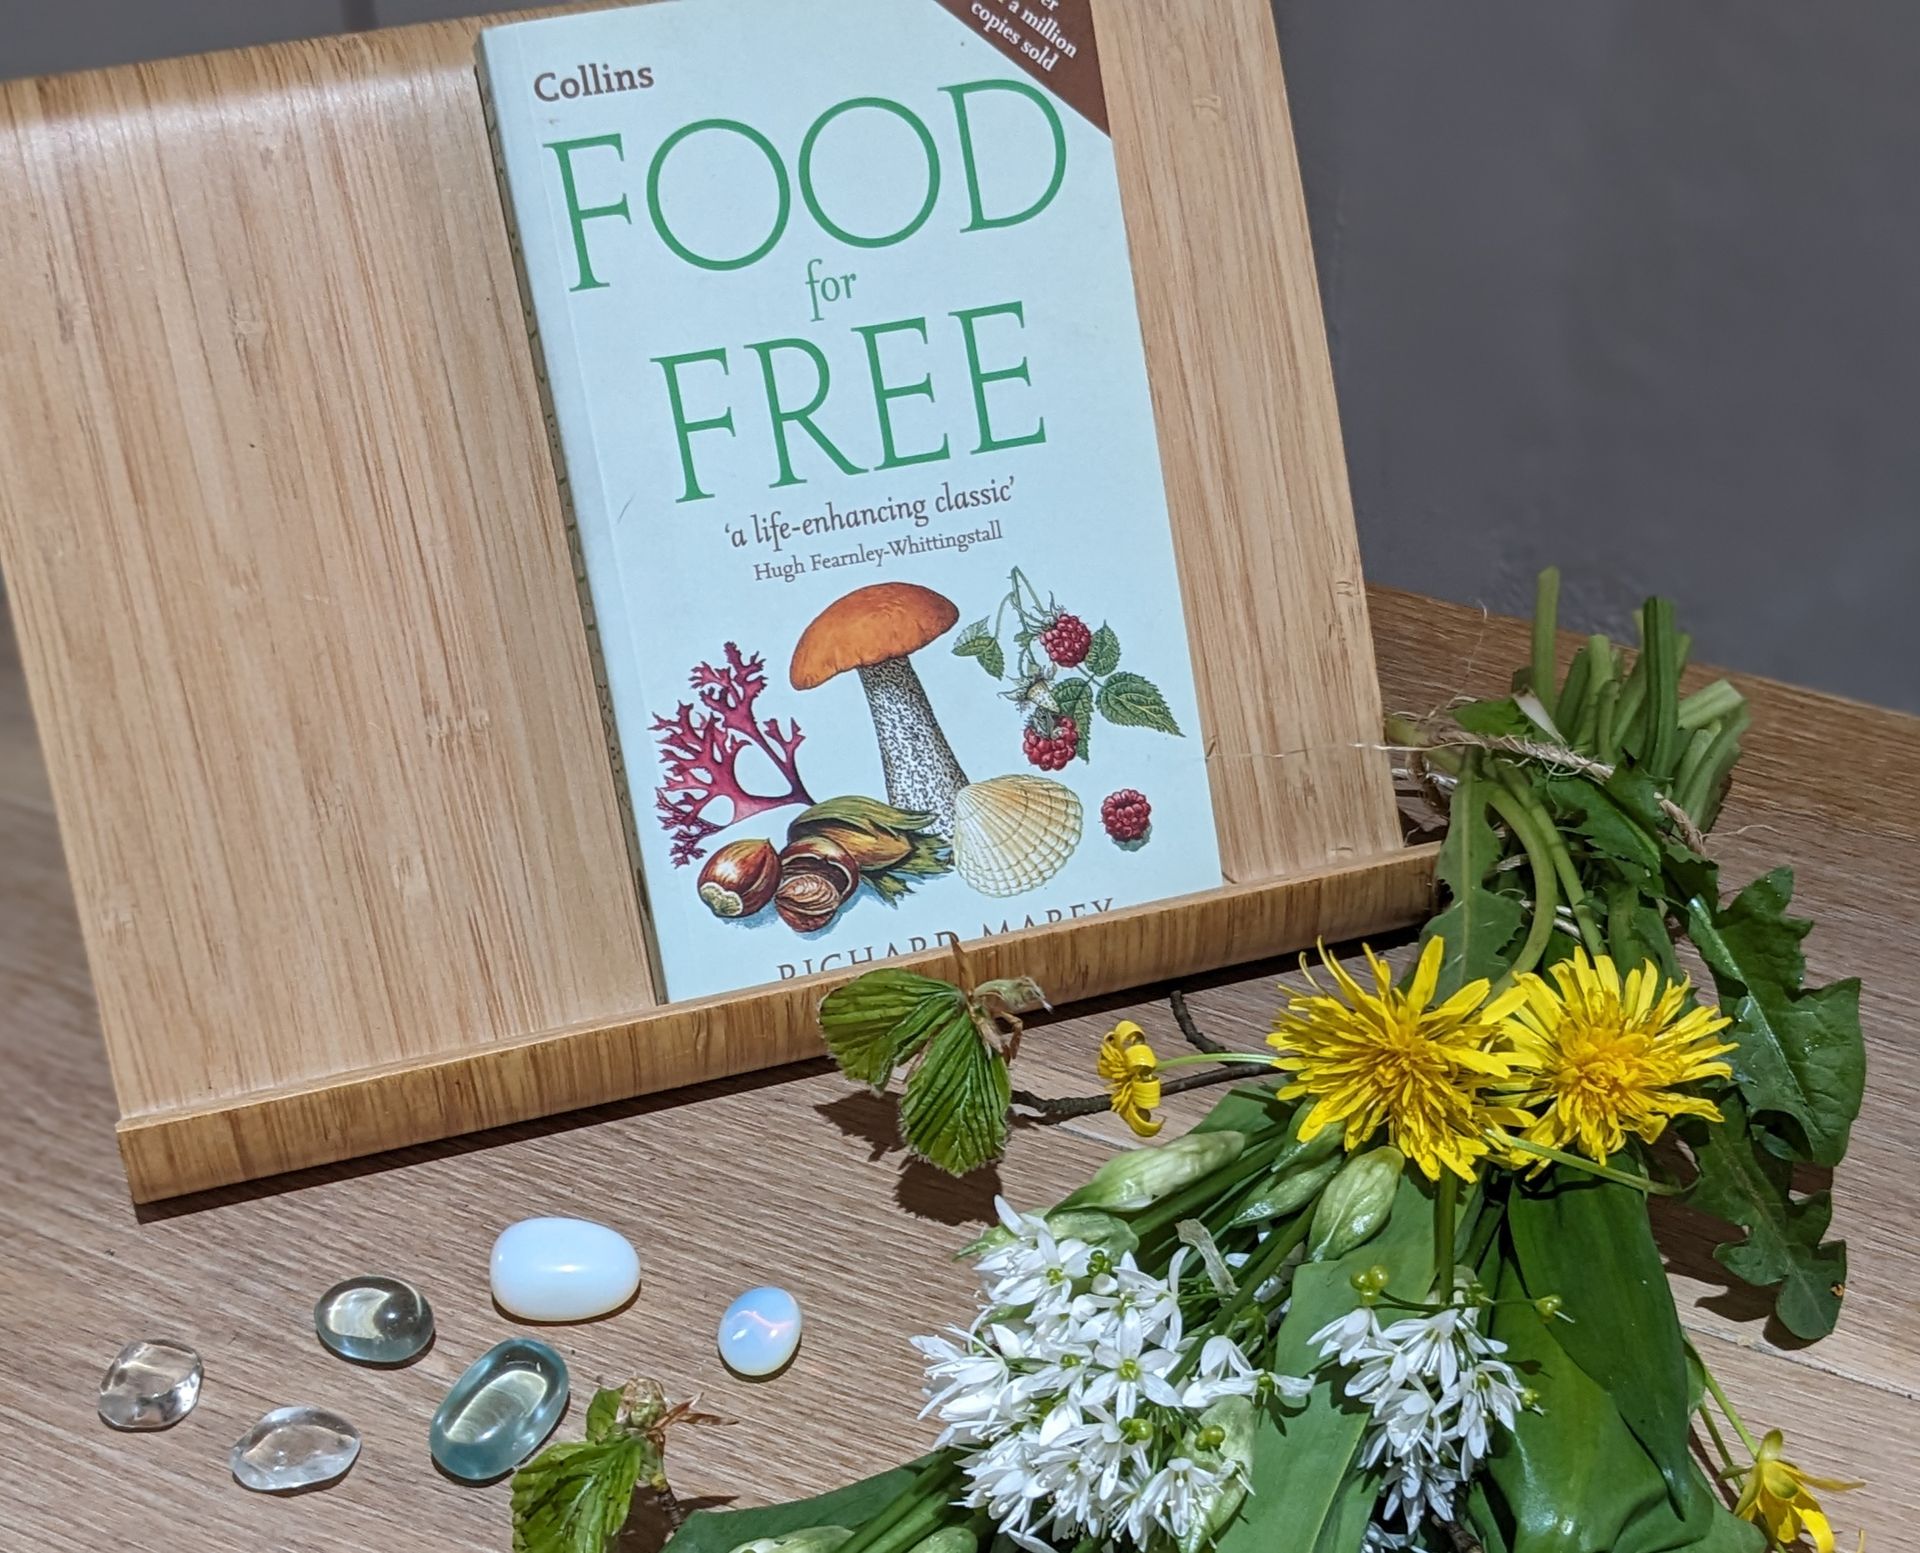 Food For Free by Richard Mabey - A Book Review by Sue Cartwright, Spiral Leaf